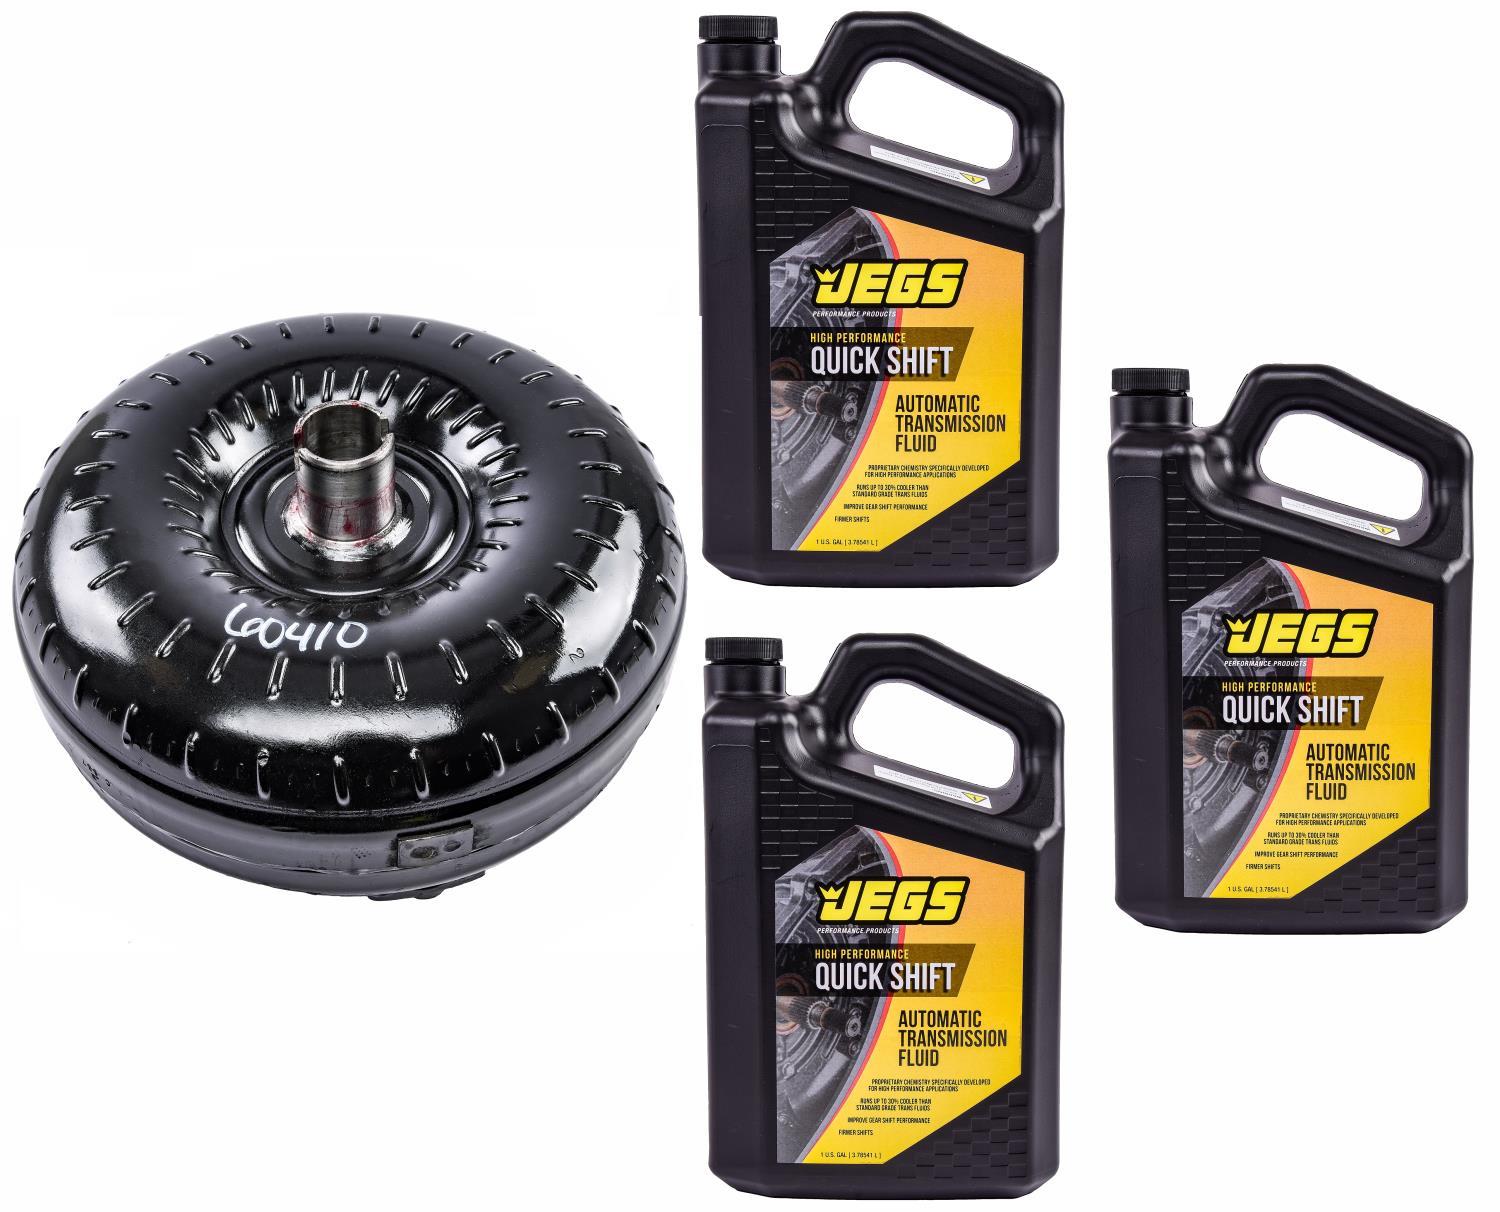 Torque Converter Kit for GM 700R4 [2000-2400 RPM Stall Speed]